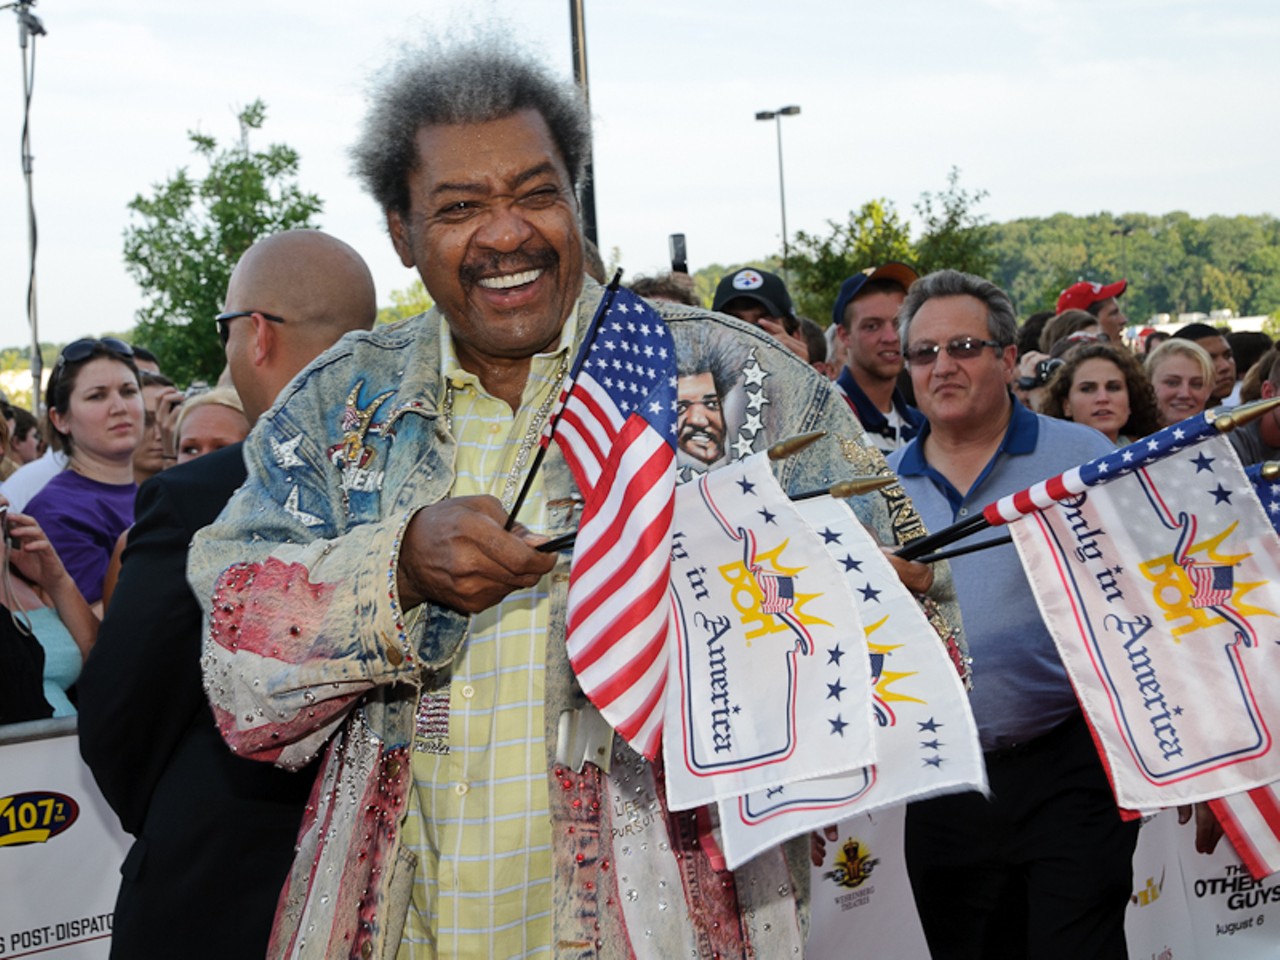 Don King, showing love to the press section at The Other Guys' Other Premier.